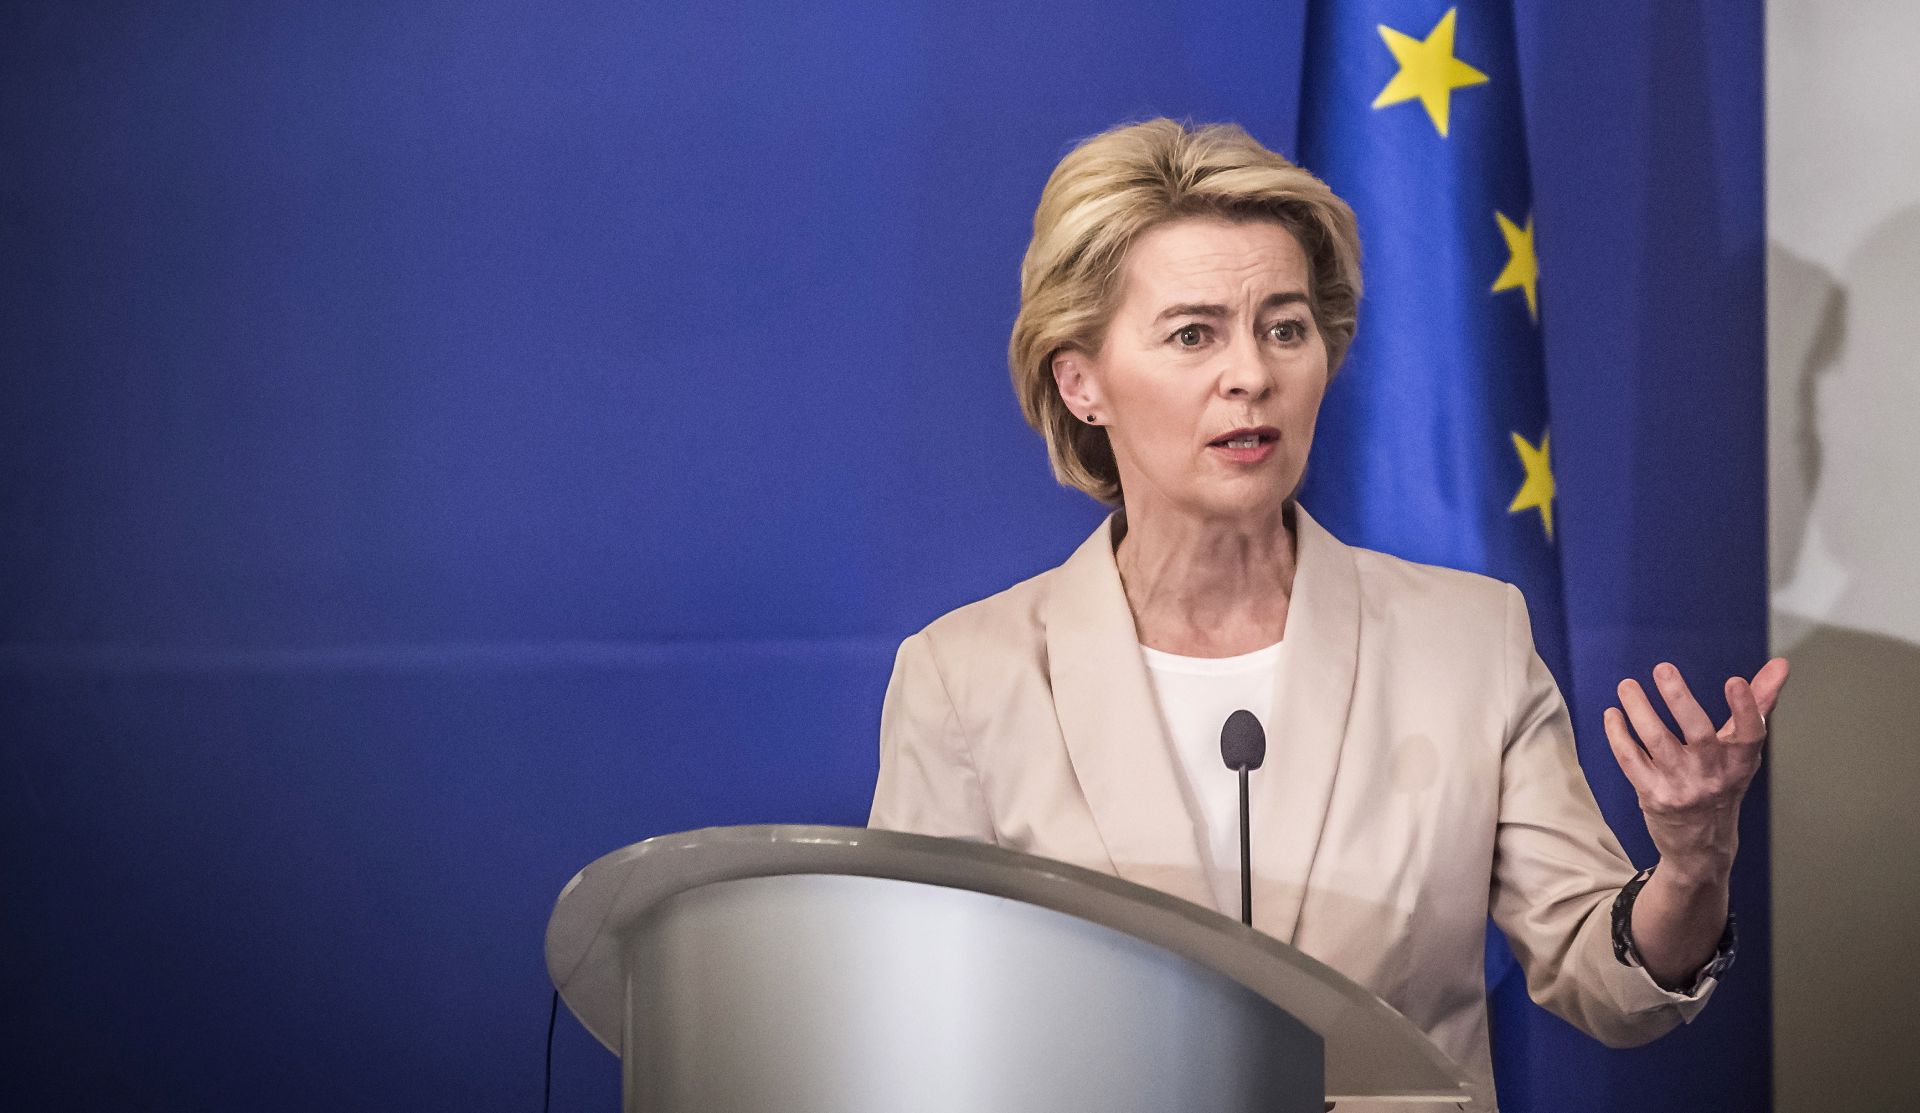 epa07801006 President-elect of the European Commission Ursula von der Leyen speaks during an official visit in Sofia, Bulgaria, 29 August 2019. President of the European Commission Ursula von der Leyen arrived for an official visit to Sofia.  EPA/Borislav Troshev